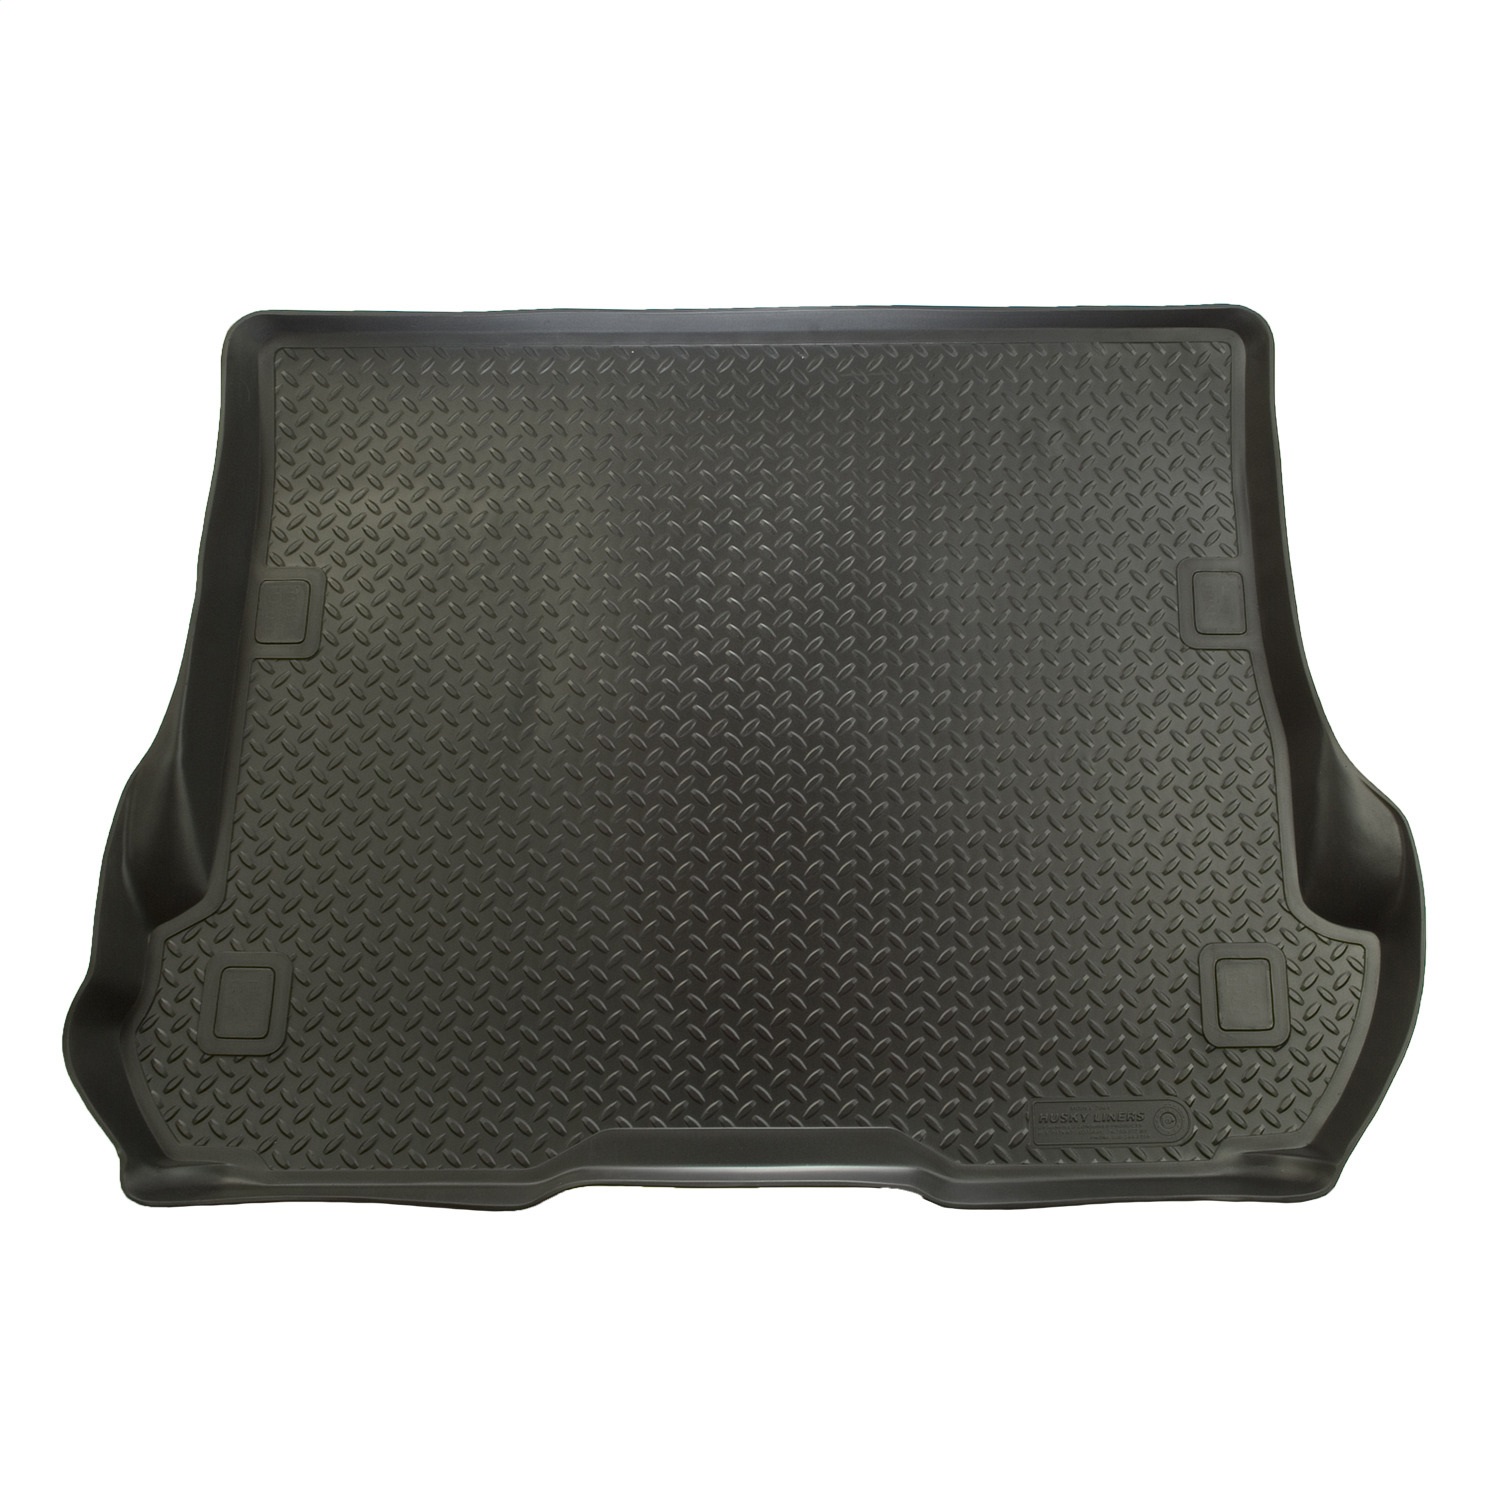 Husky Liners Husky Liners 26281 Classic Style; Cargo Liner Fits 05-14 Xterra